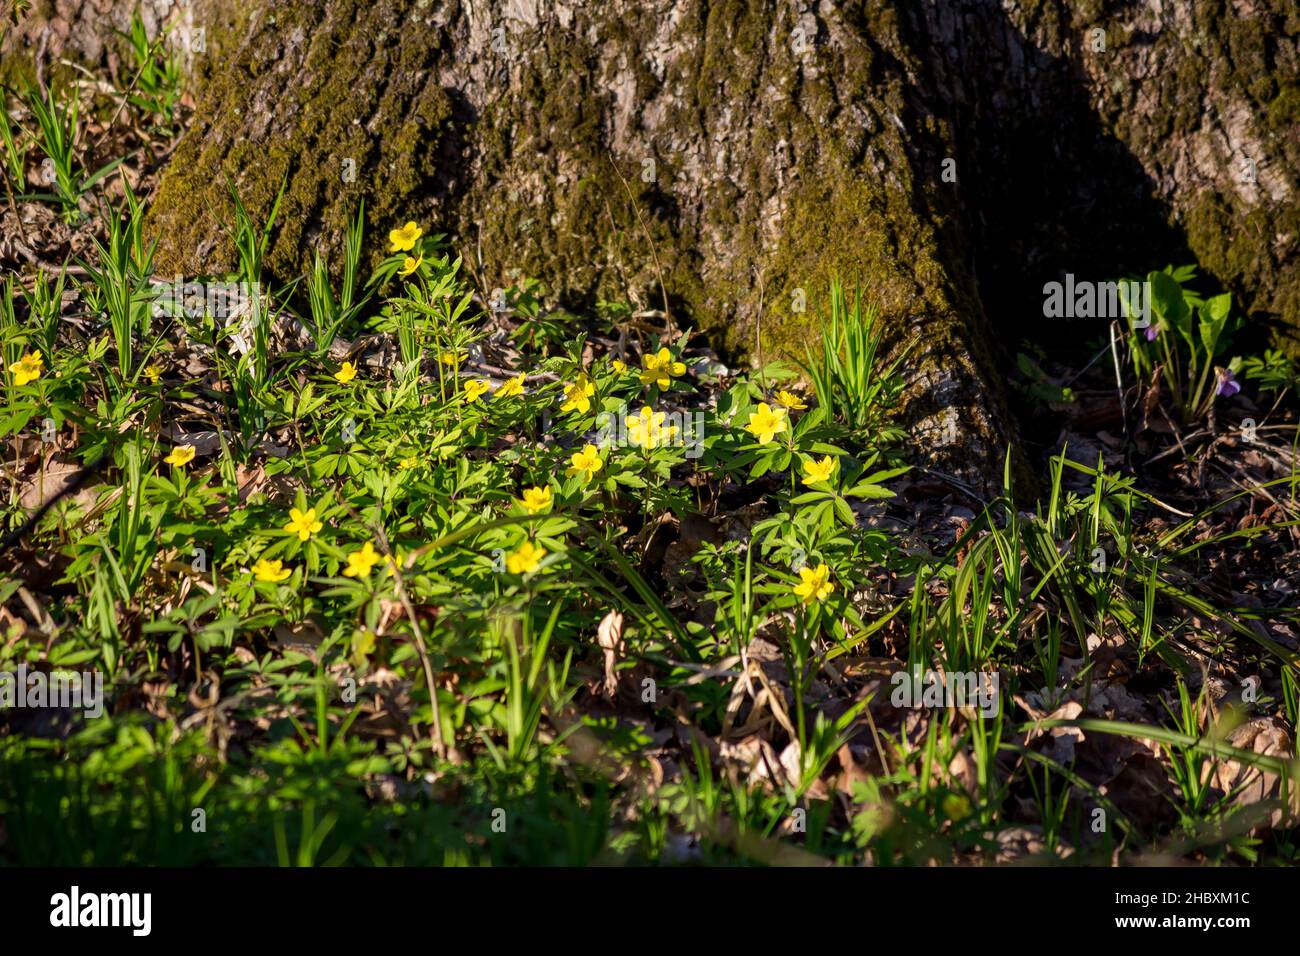 Yellow flowers of Anemone ranunculoides (yellow wood anemone or buttercup anemone) plant lit by the sun growing under a tree Stock Photo